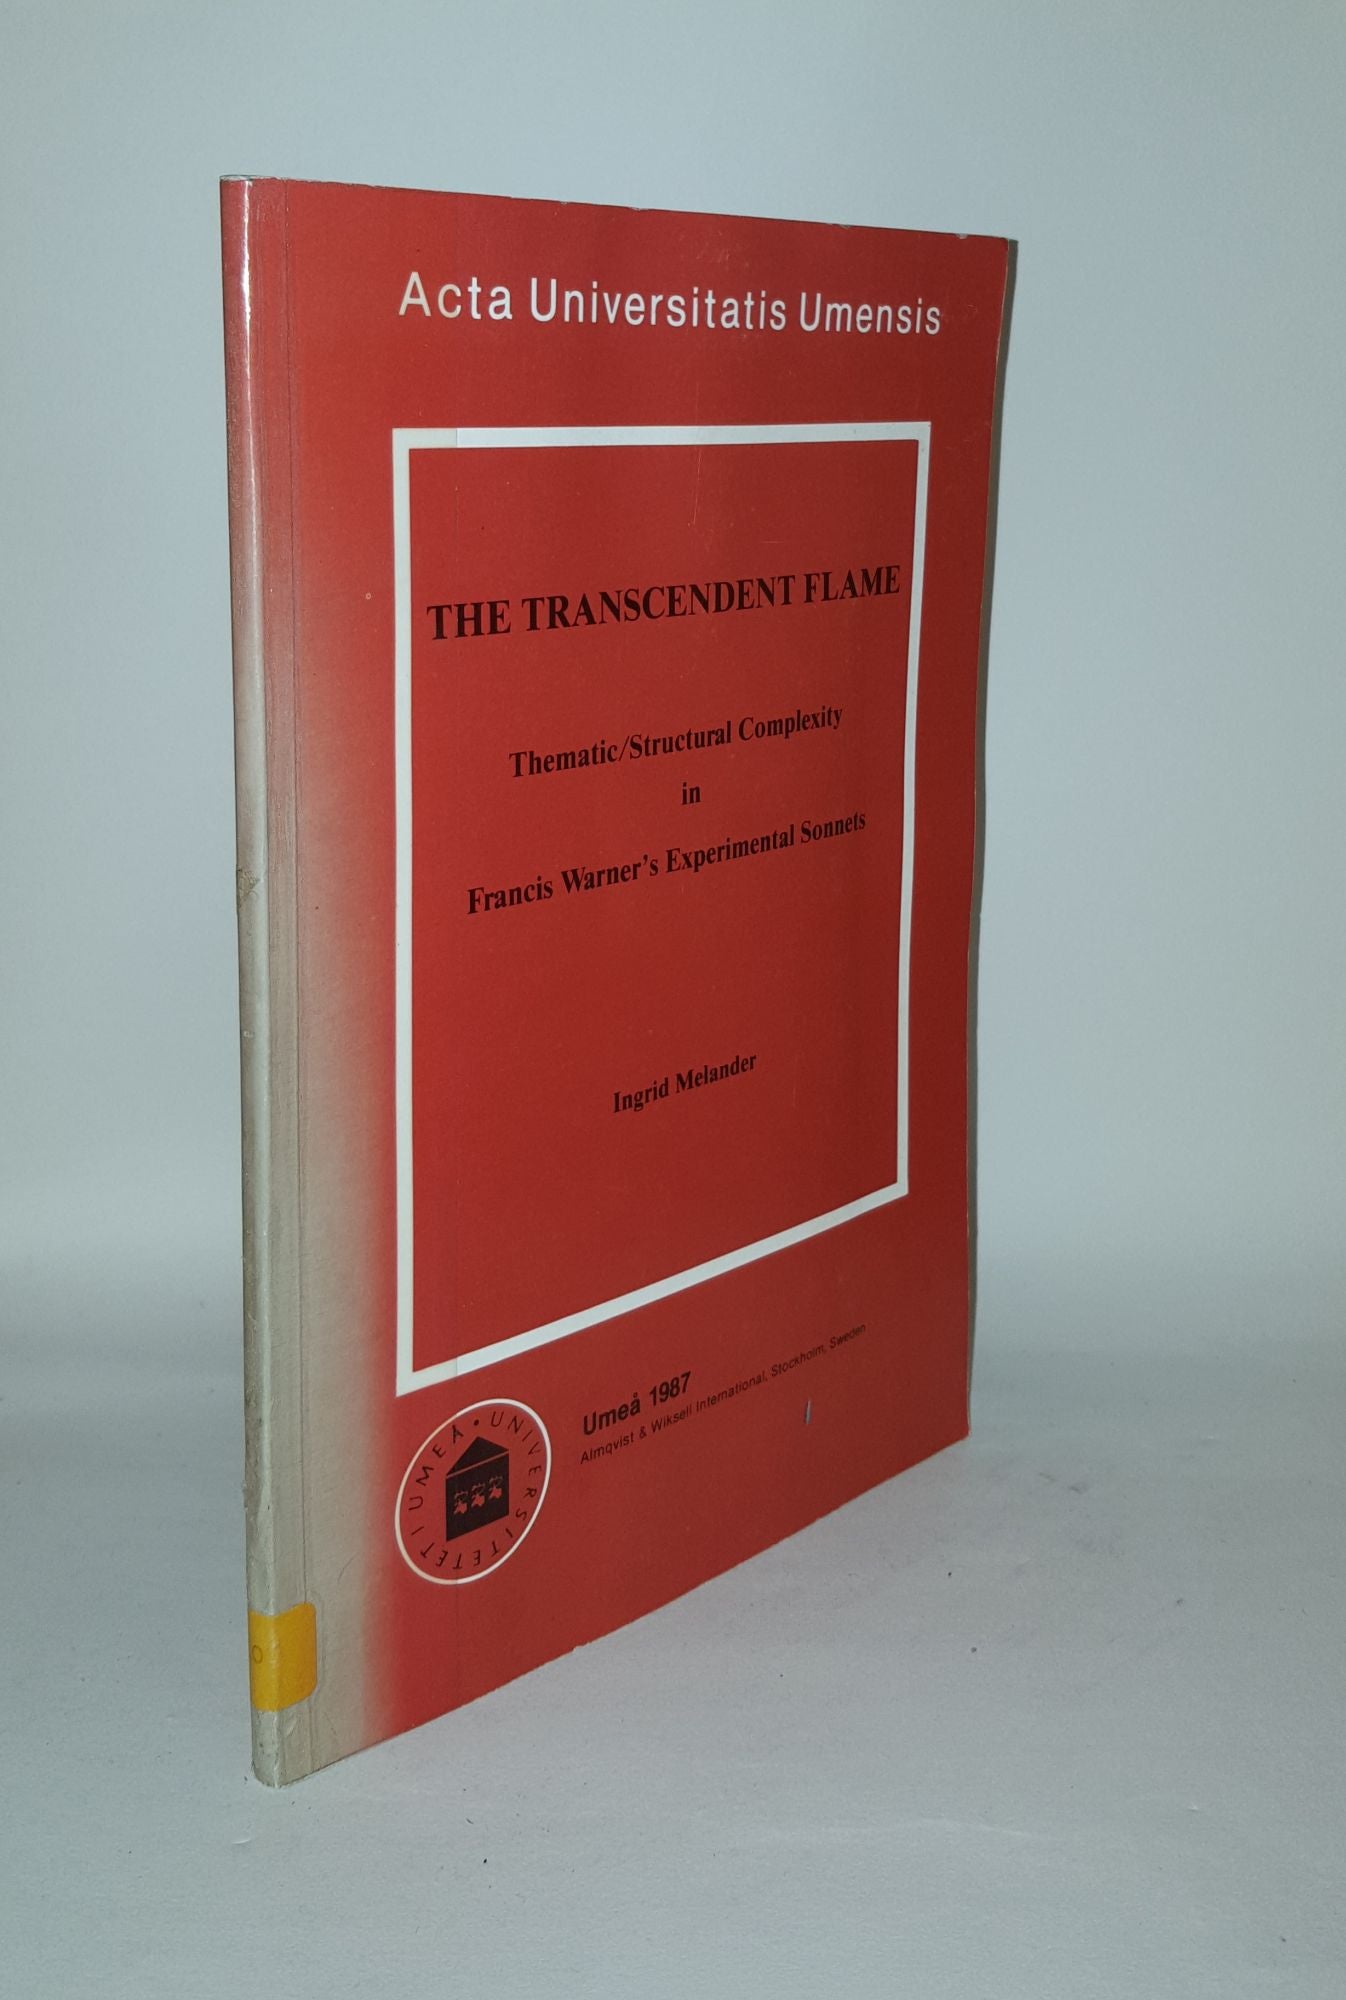 MELANDER Ingrid - The Transcendant Flame Thematic/Structural Complexity in Francis Warner'a Experimental Sonnets